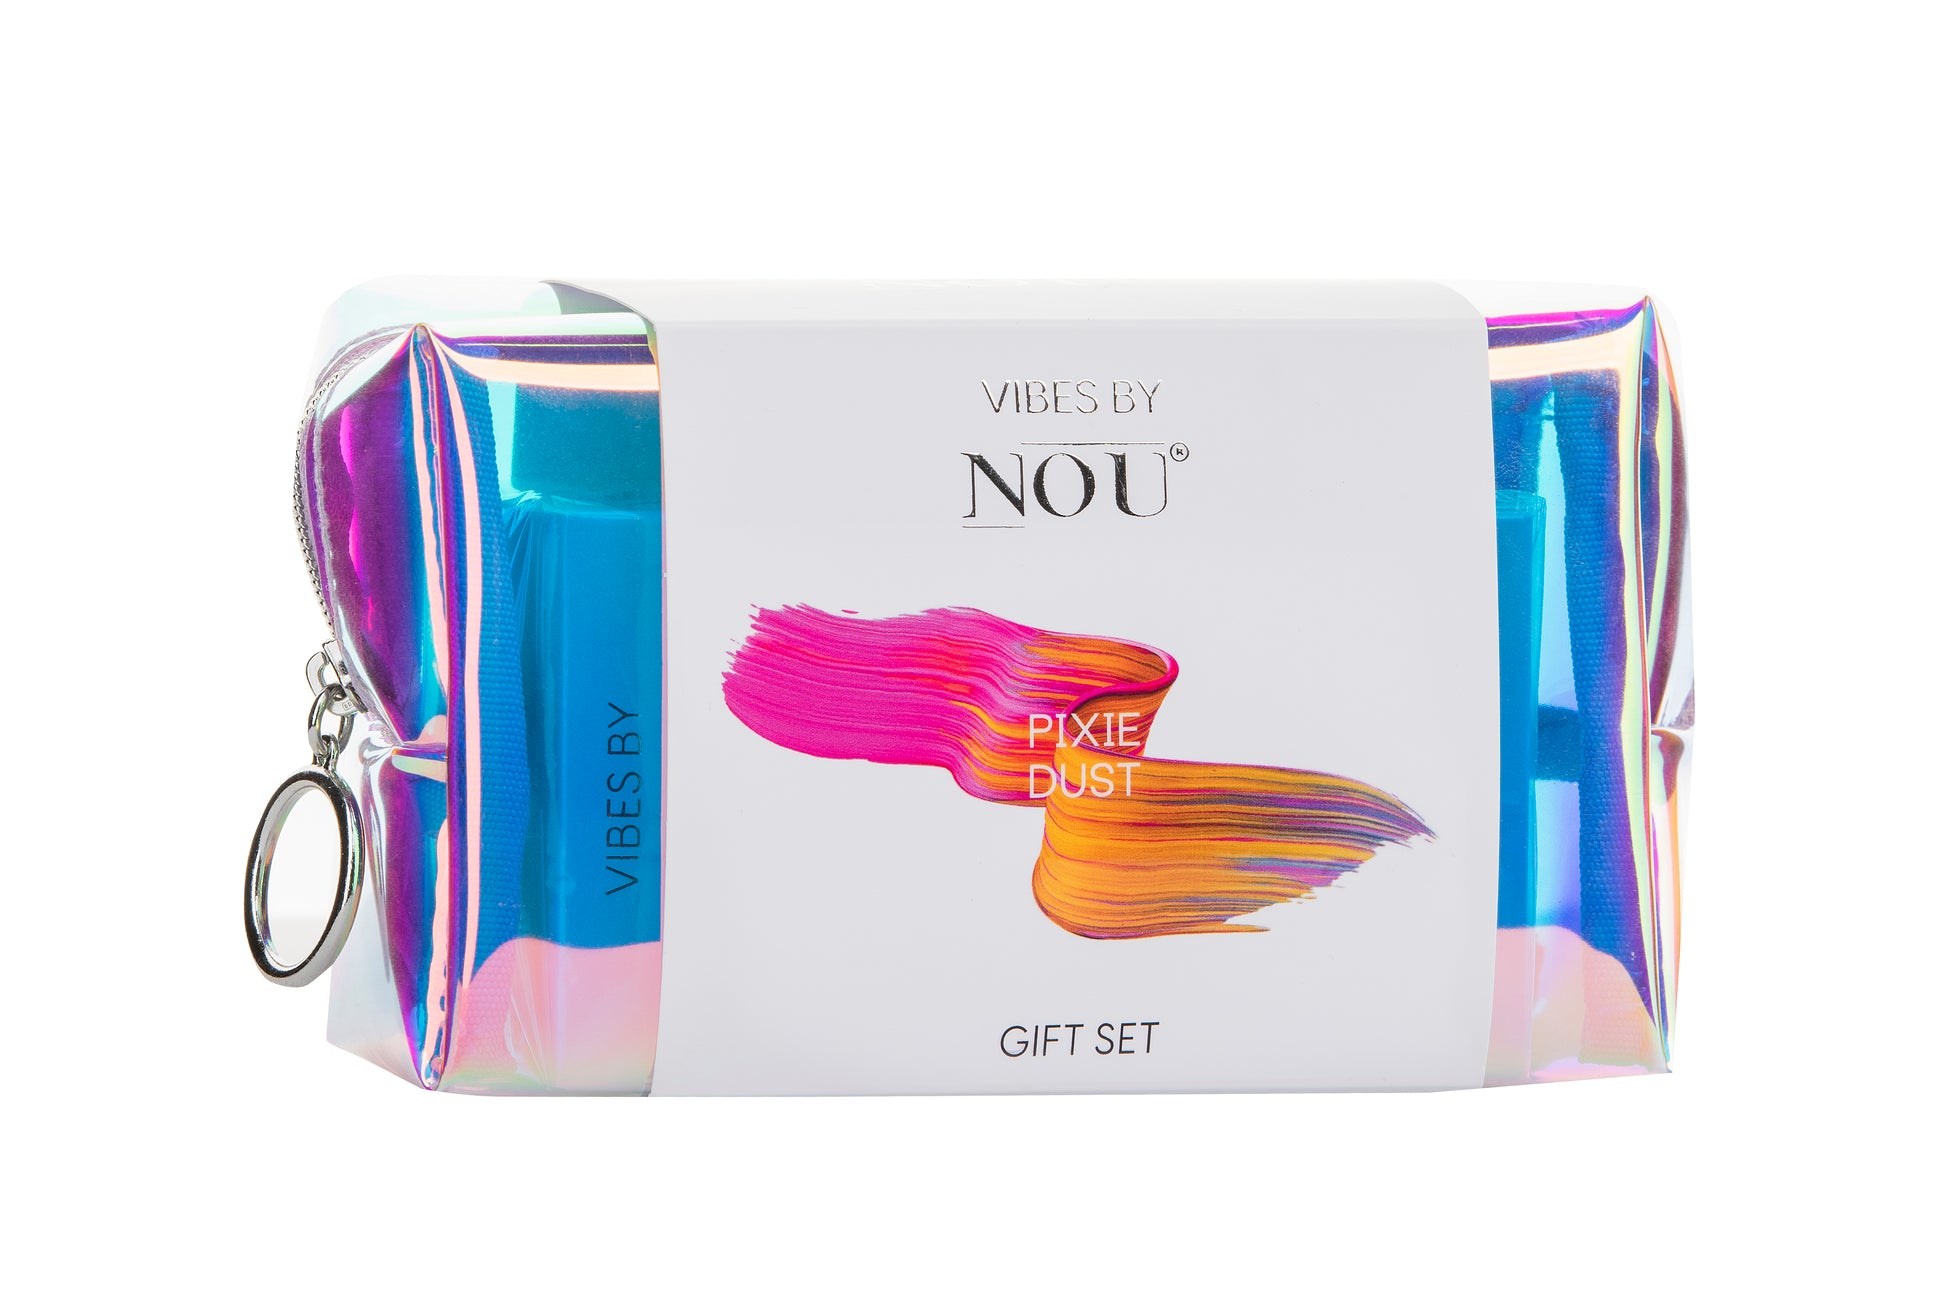 NOU VIBES BY NOU PIXIE DUST GIFT SET - EASTERN SCENT